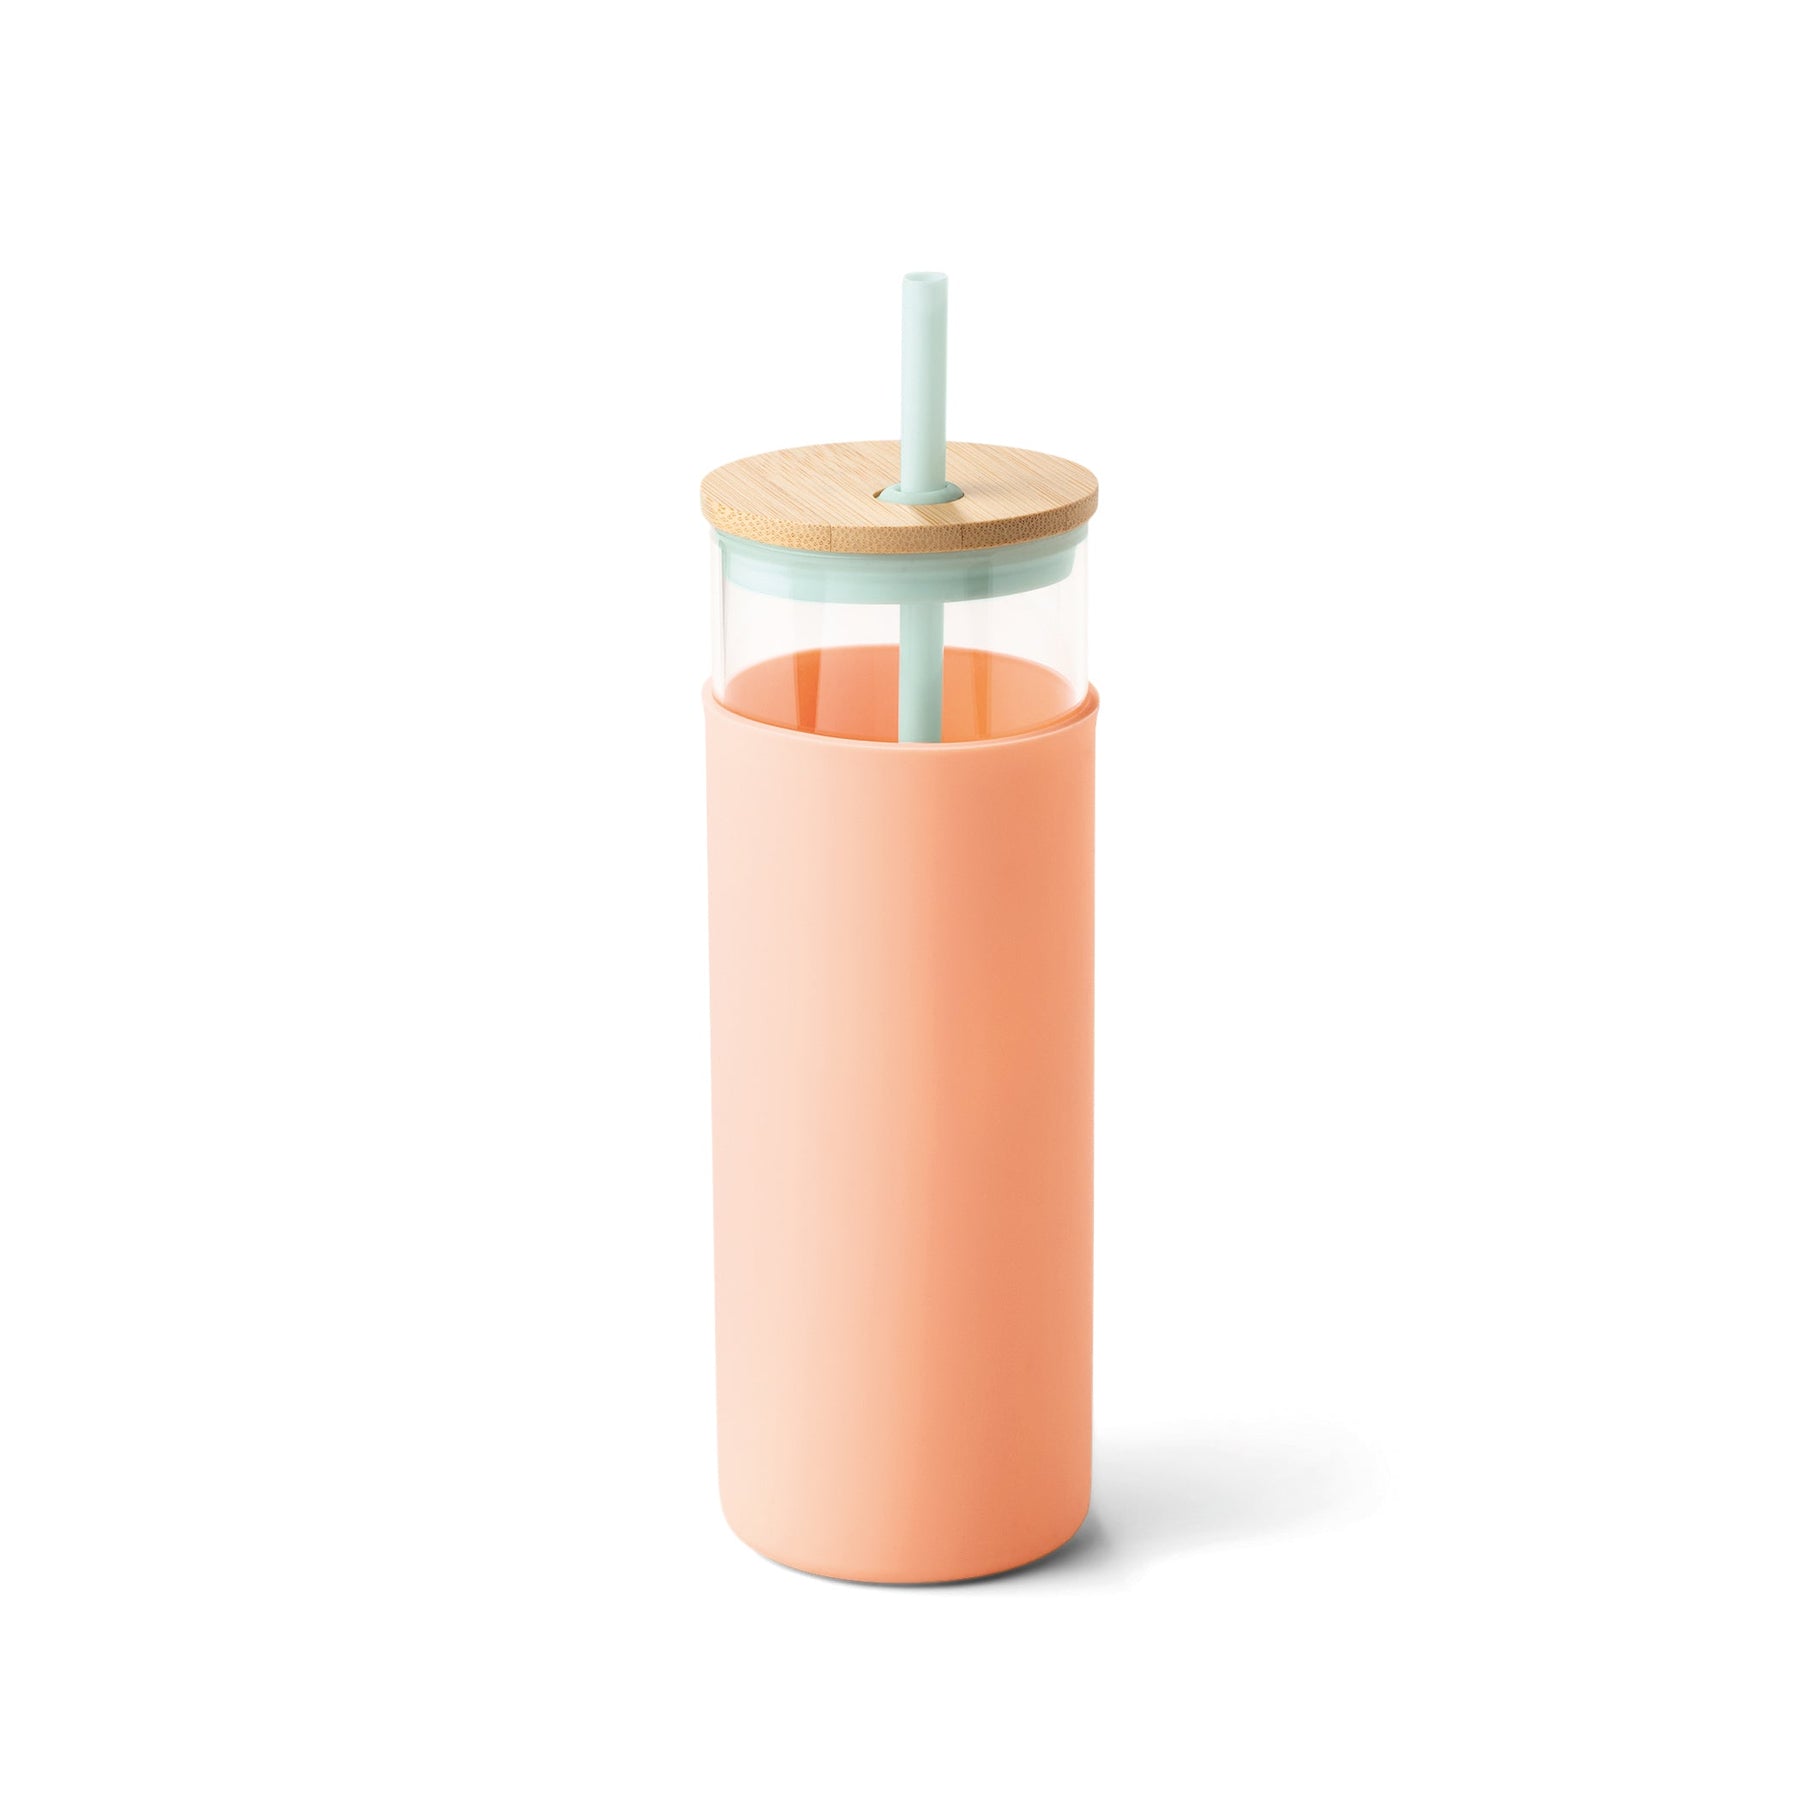 Glass Tumbler With Straw - Mint & Peach